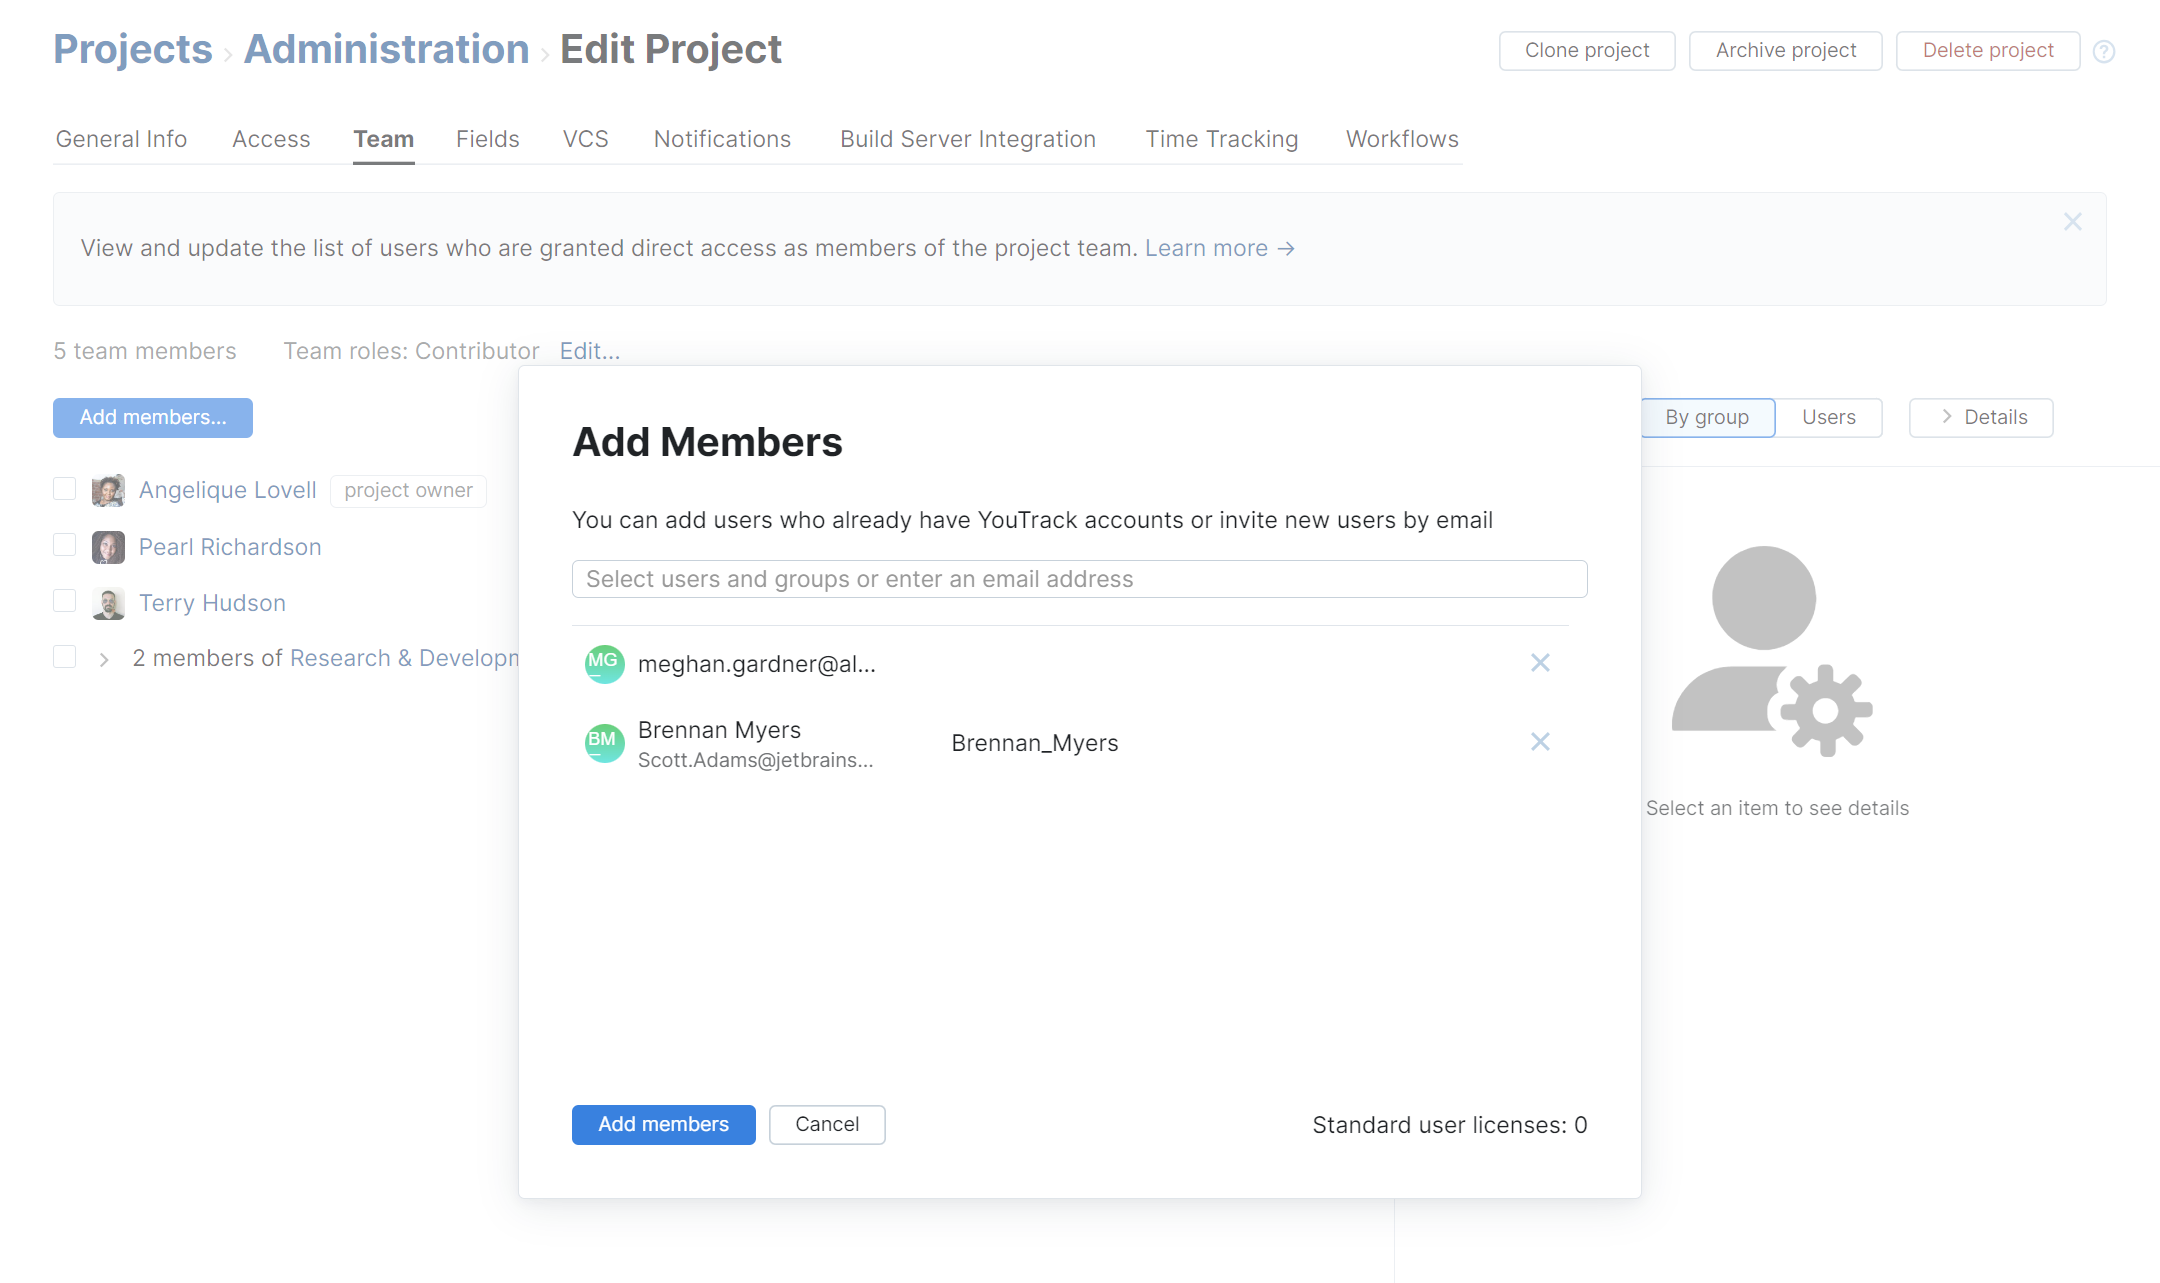 Options for adding users to a project team.